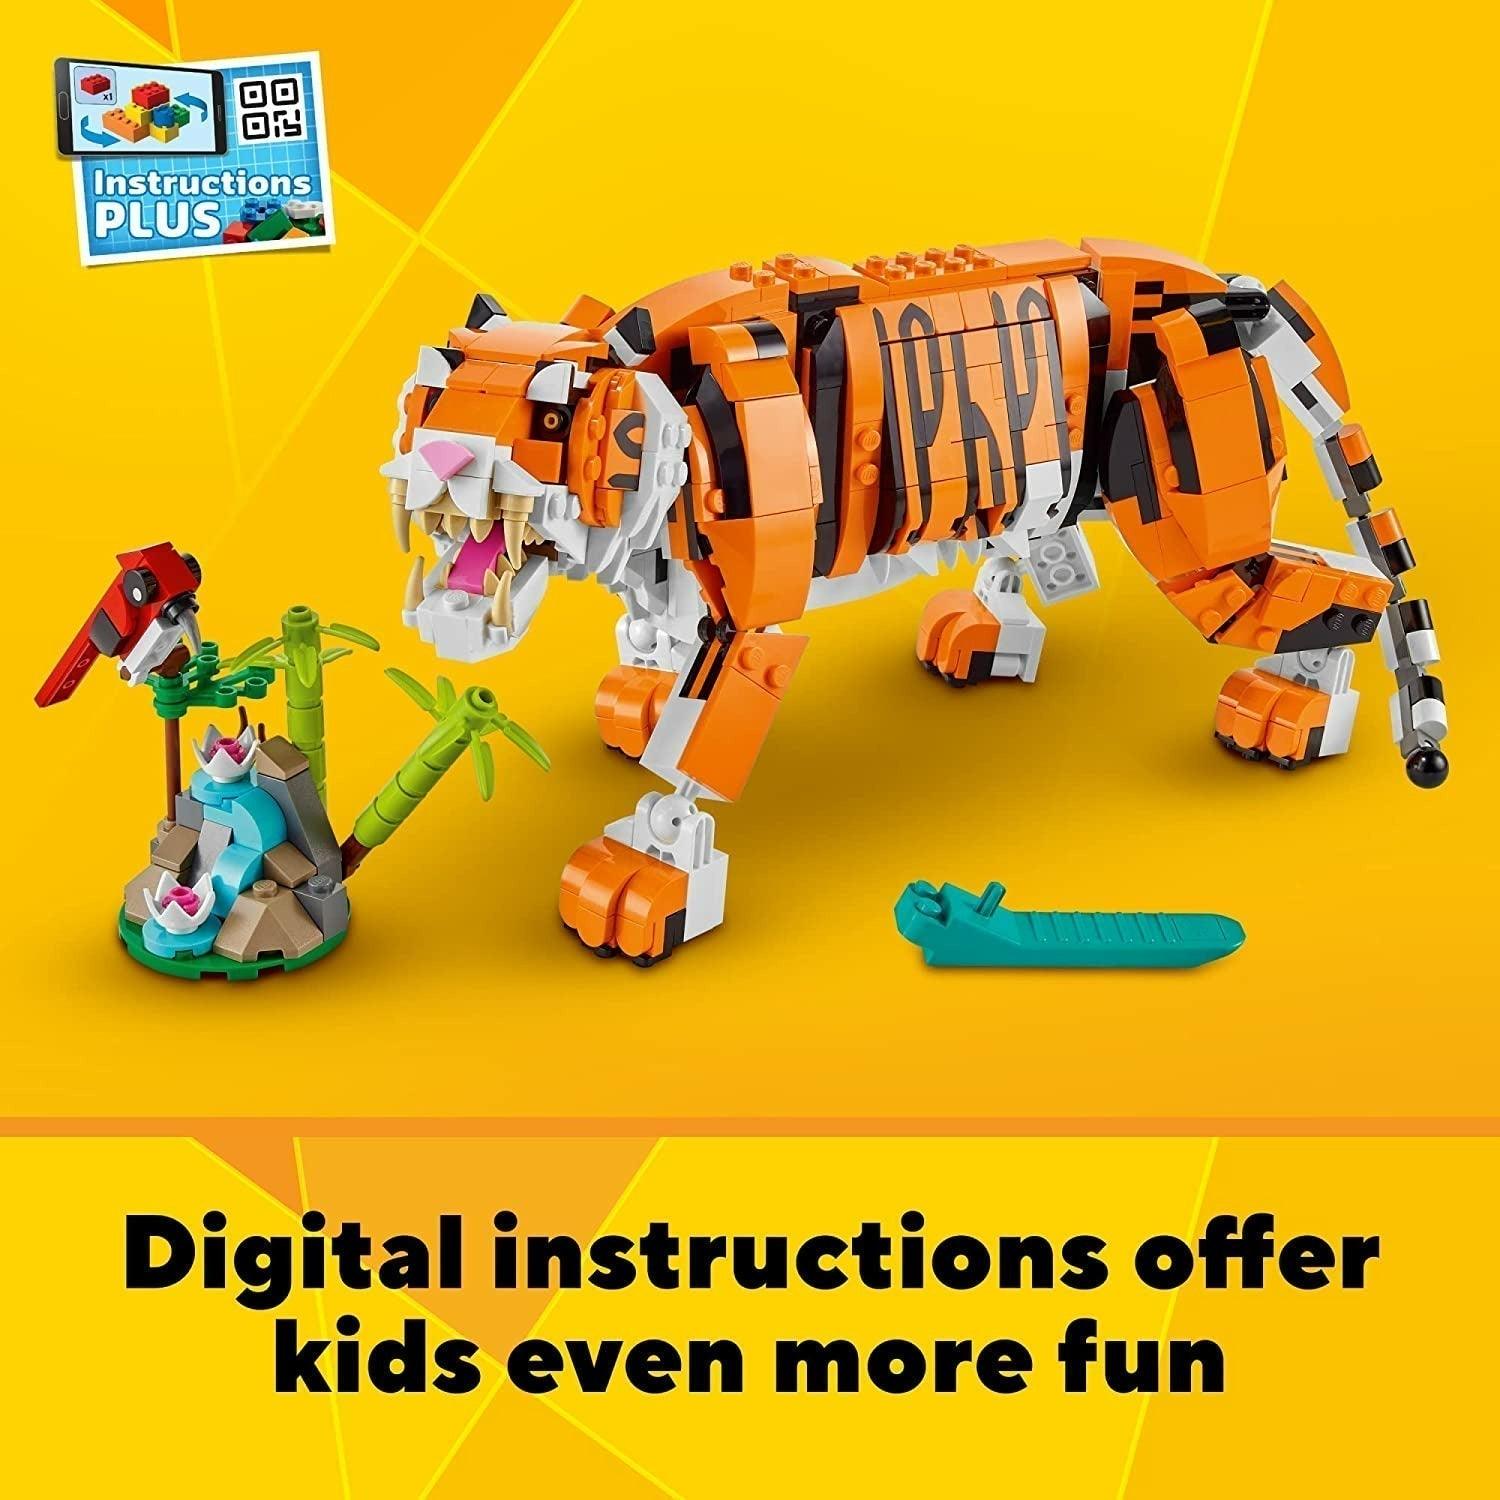 LEGO Creator 3in1 Majestic Tiger 31129 Building Kit; Animal Toys for Kids, Featuring a Tiger, Panda and Koi Fish (755 Pieces) - BumbleToys - 8+ Years, 8-13 Years, Animals, Boys, Creator, Creator 3In1, LEGO, OXE, Pre-Order